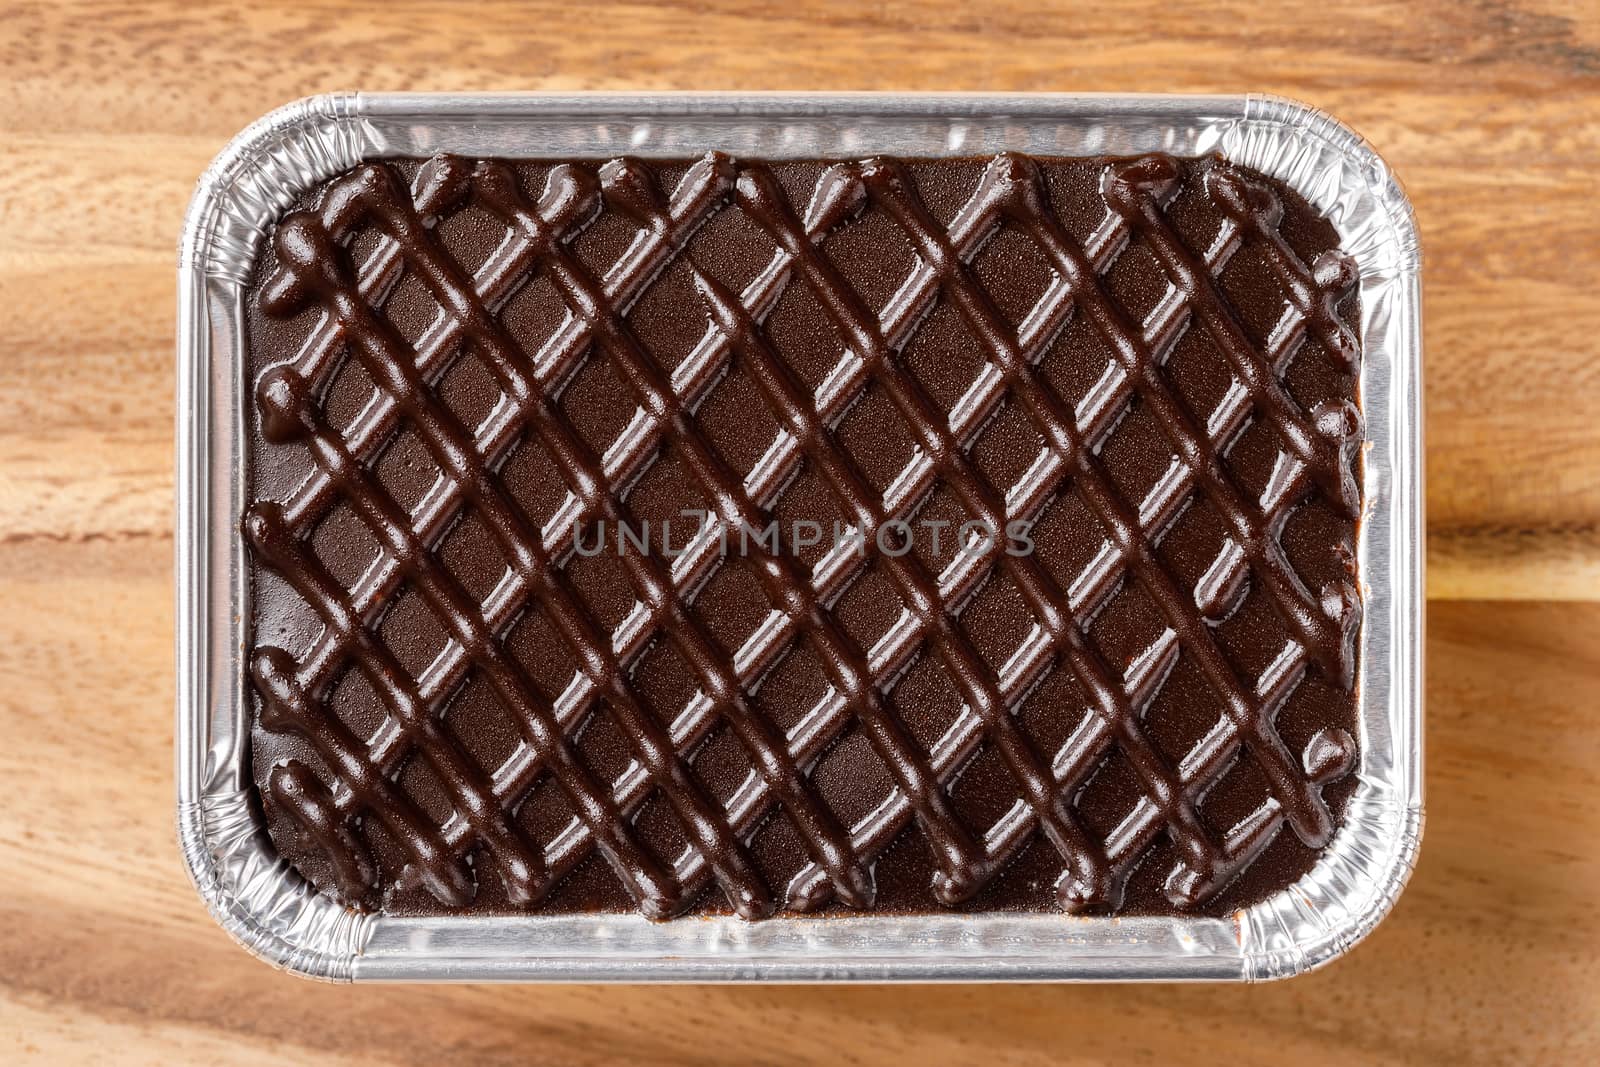 Chocolate cake in aluminium foil tray on wooden table or cutting board